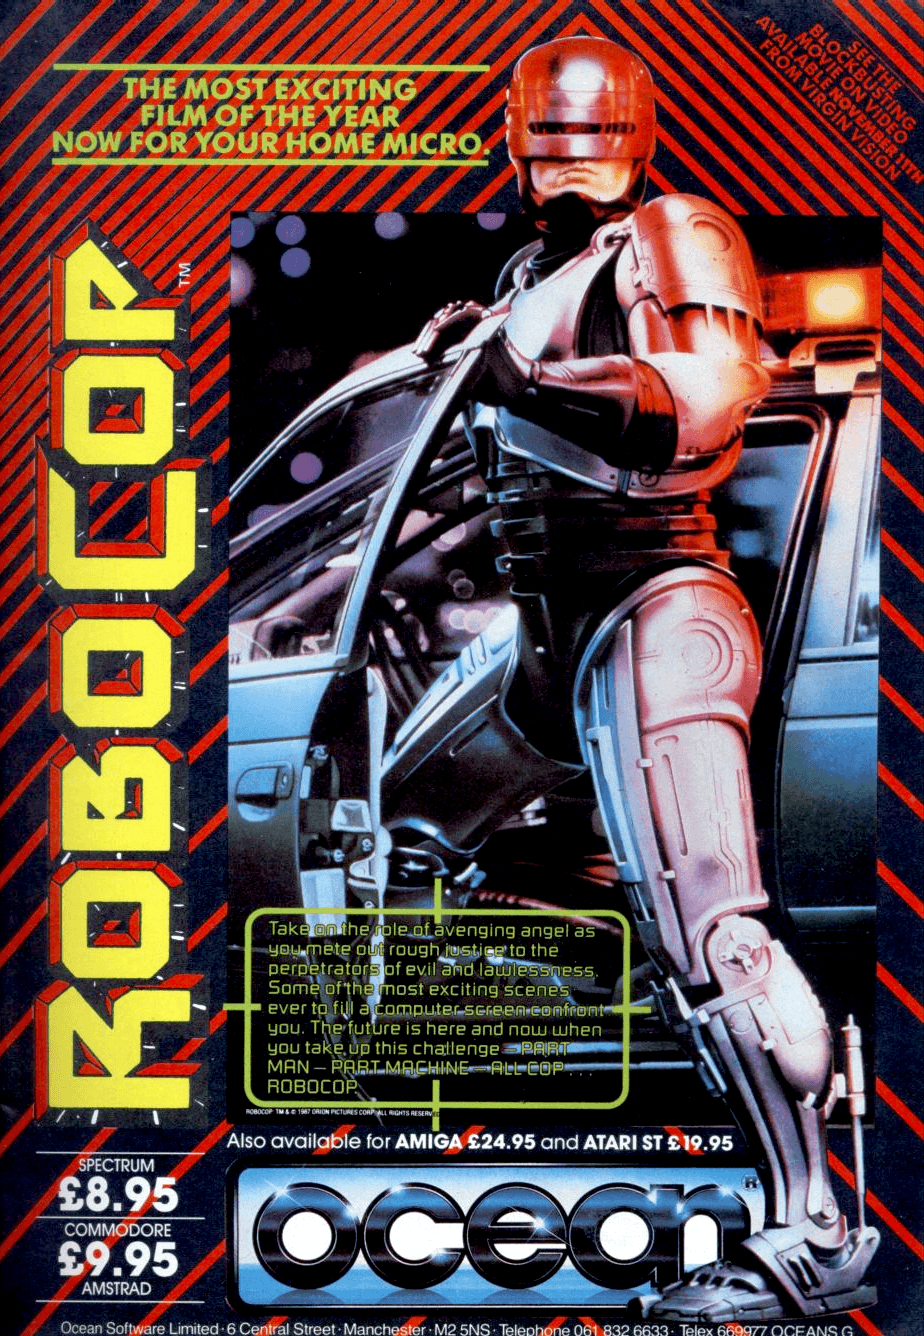 Image For Post | Based on the 1987 movie of the same name, RoboCop allows the player to control RoboCop. The majority of the game is a side scroller. RoboCop can punch unarmed citizens and shoot armed citizens. He can move left, right and duck but can not jump. Different weapons can be picked up from enemies, and power-ups to restore health and/or energy. Following levels, RoboCop will have to match a criminal's face to the proper mugshot and engage in a first-person shooting bonus round.

Amiga and Atari ST versions are faithful to the original level design of the Arcade game, but they also add first-person rescue hostage scenarios, and a mini-game where the player needs to match the suspects' faces.